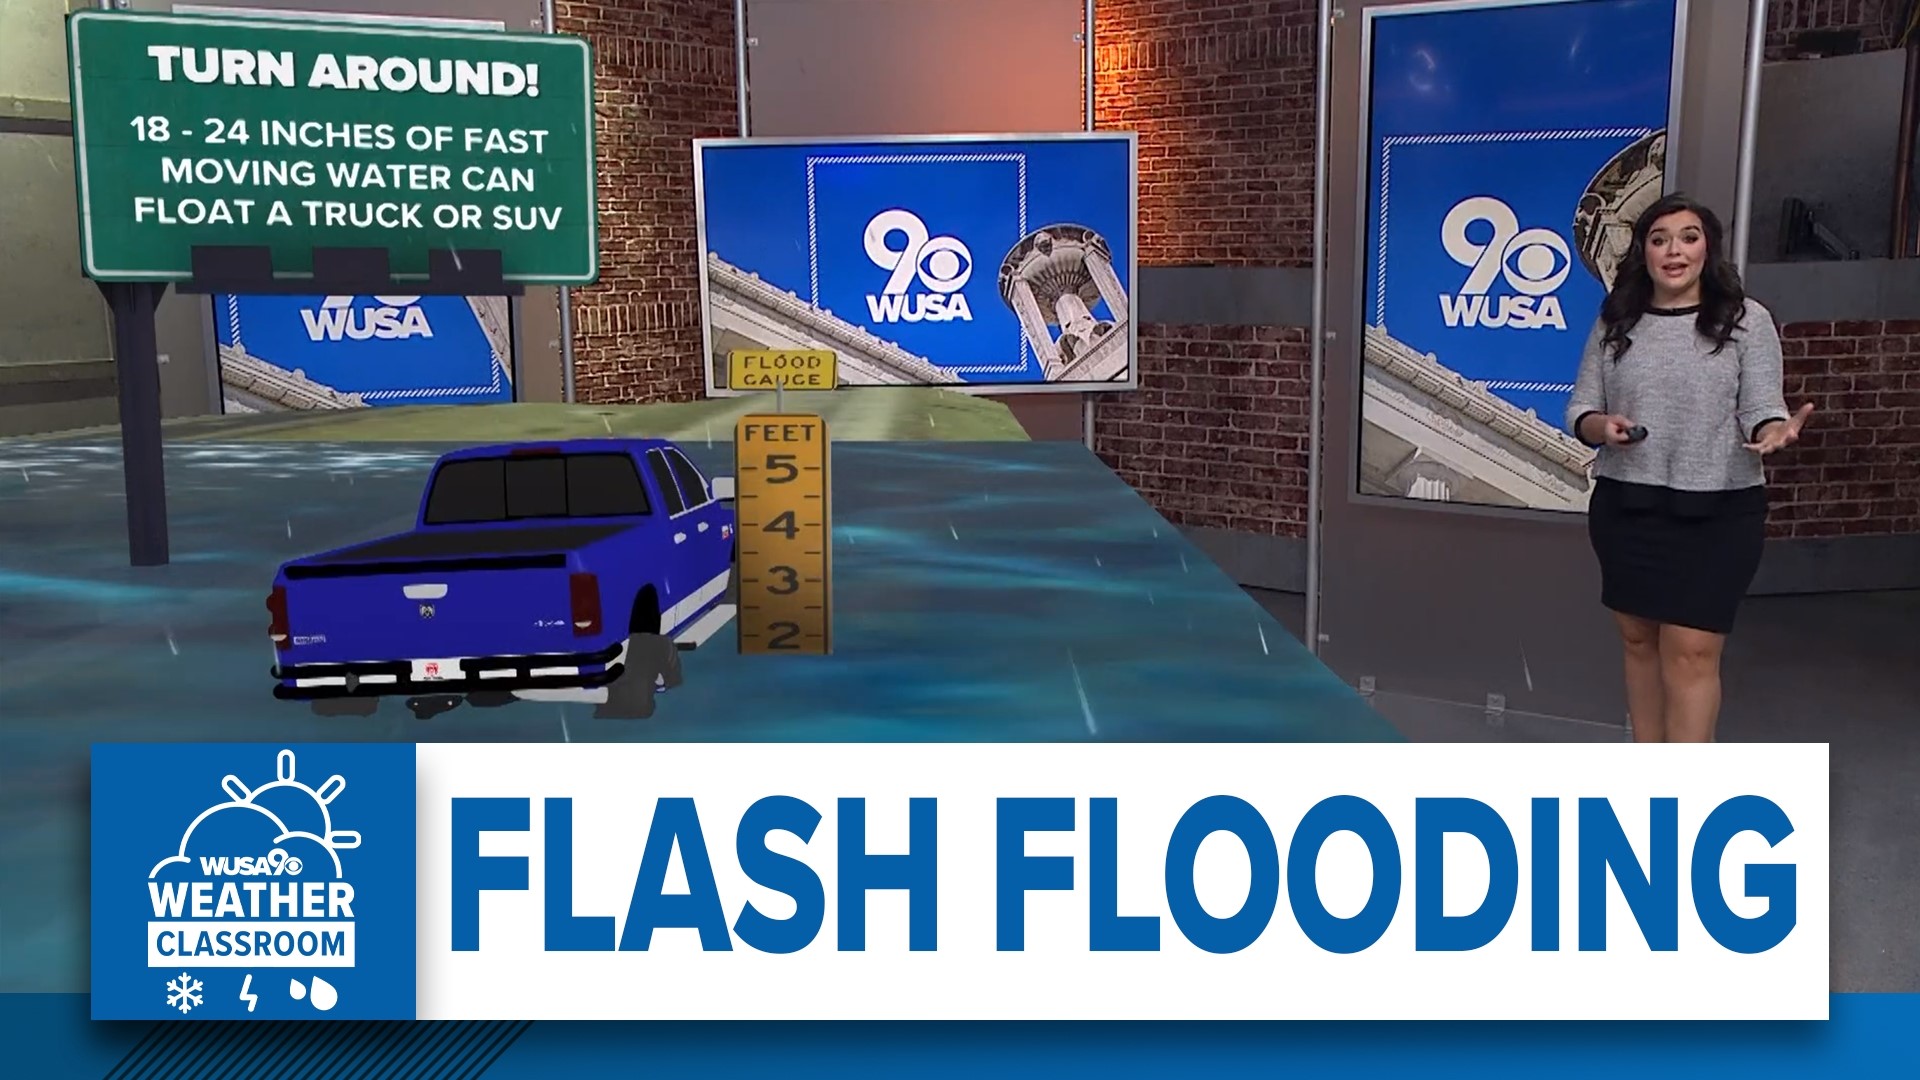 Meteorologist Makayla Lucero warns against the dangers associated with flash flooding.